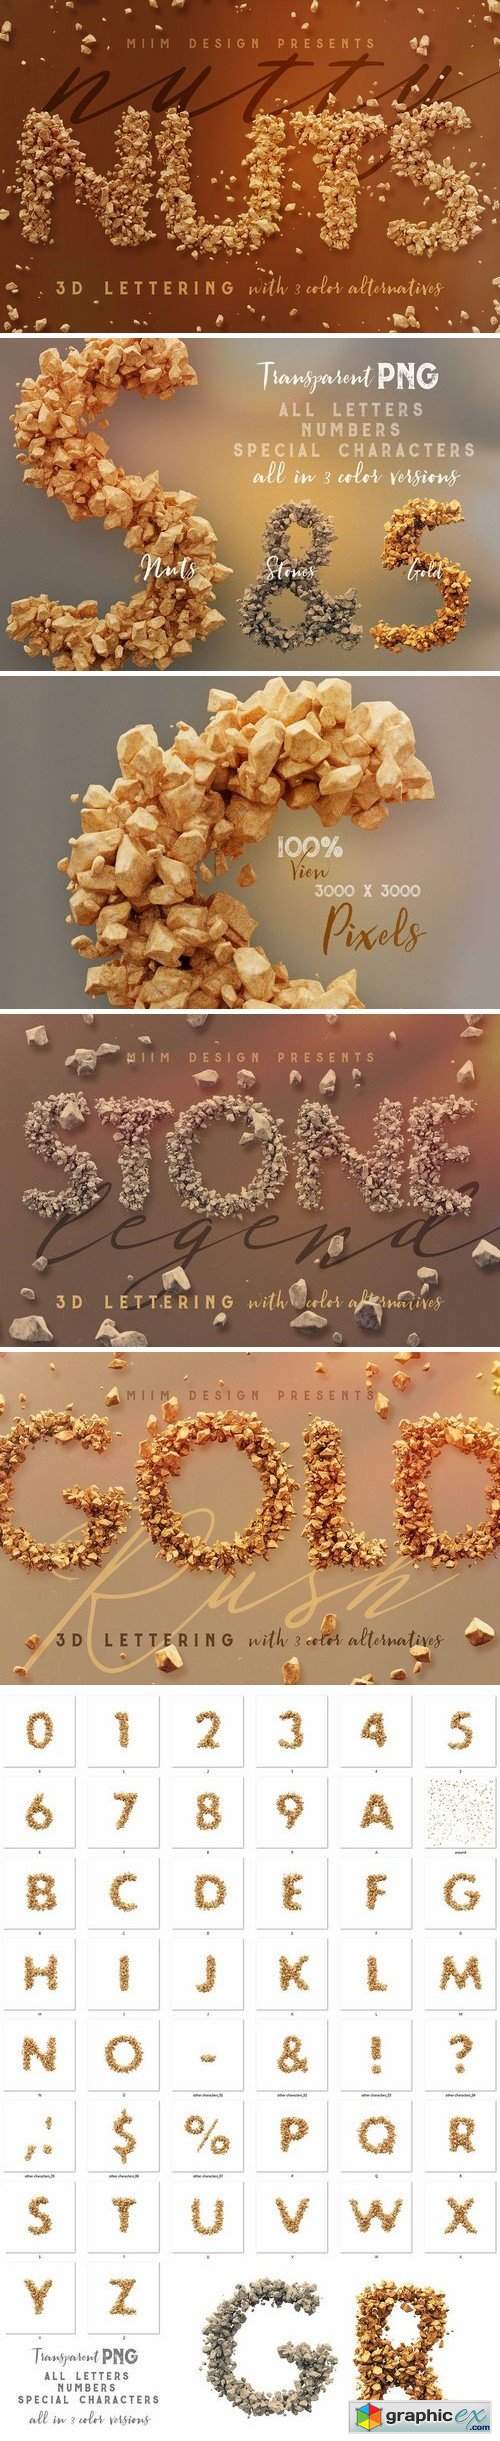 Nutty Nuts - 3D Lettering